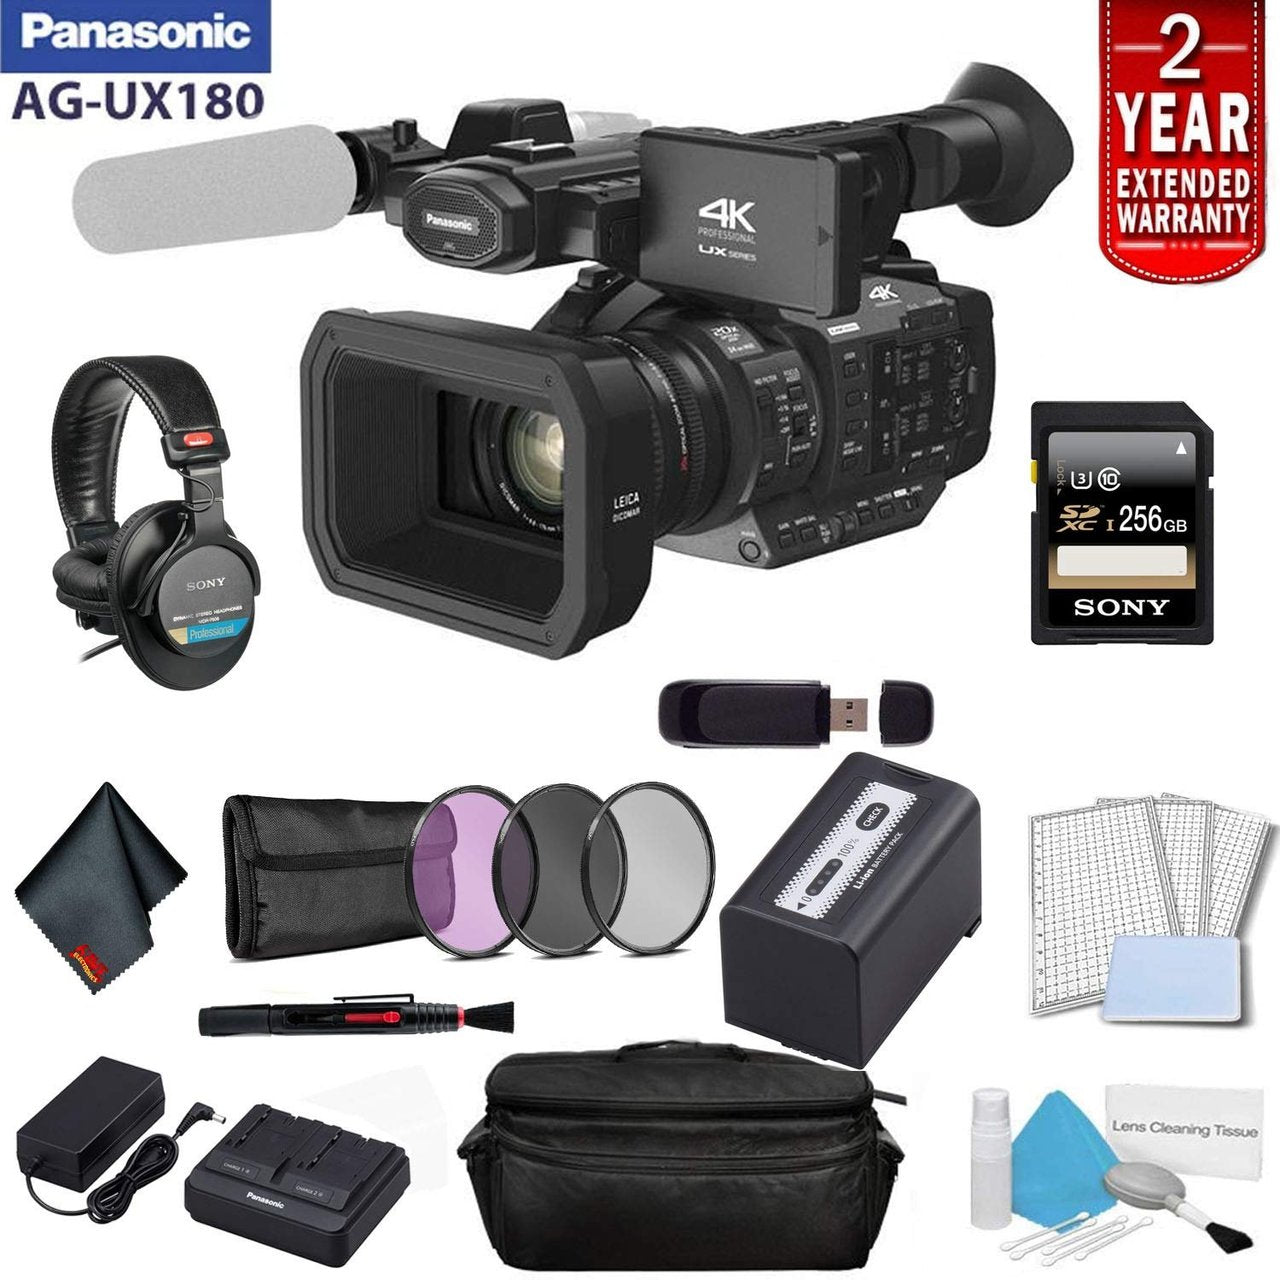 Panasonic AG-UX180 4K Premium Professional Camcorder Bundle with 2 Year Extended Warranty, Sony MDR-7506 Headphones + Sony 256GB SDXC Memory Card + More